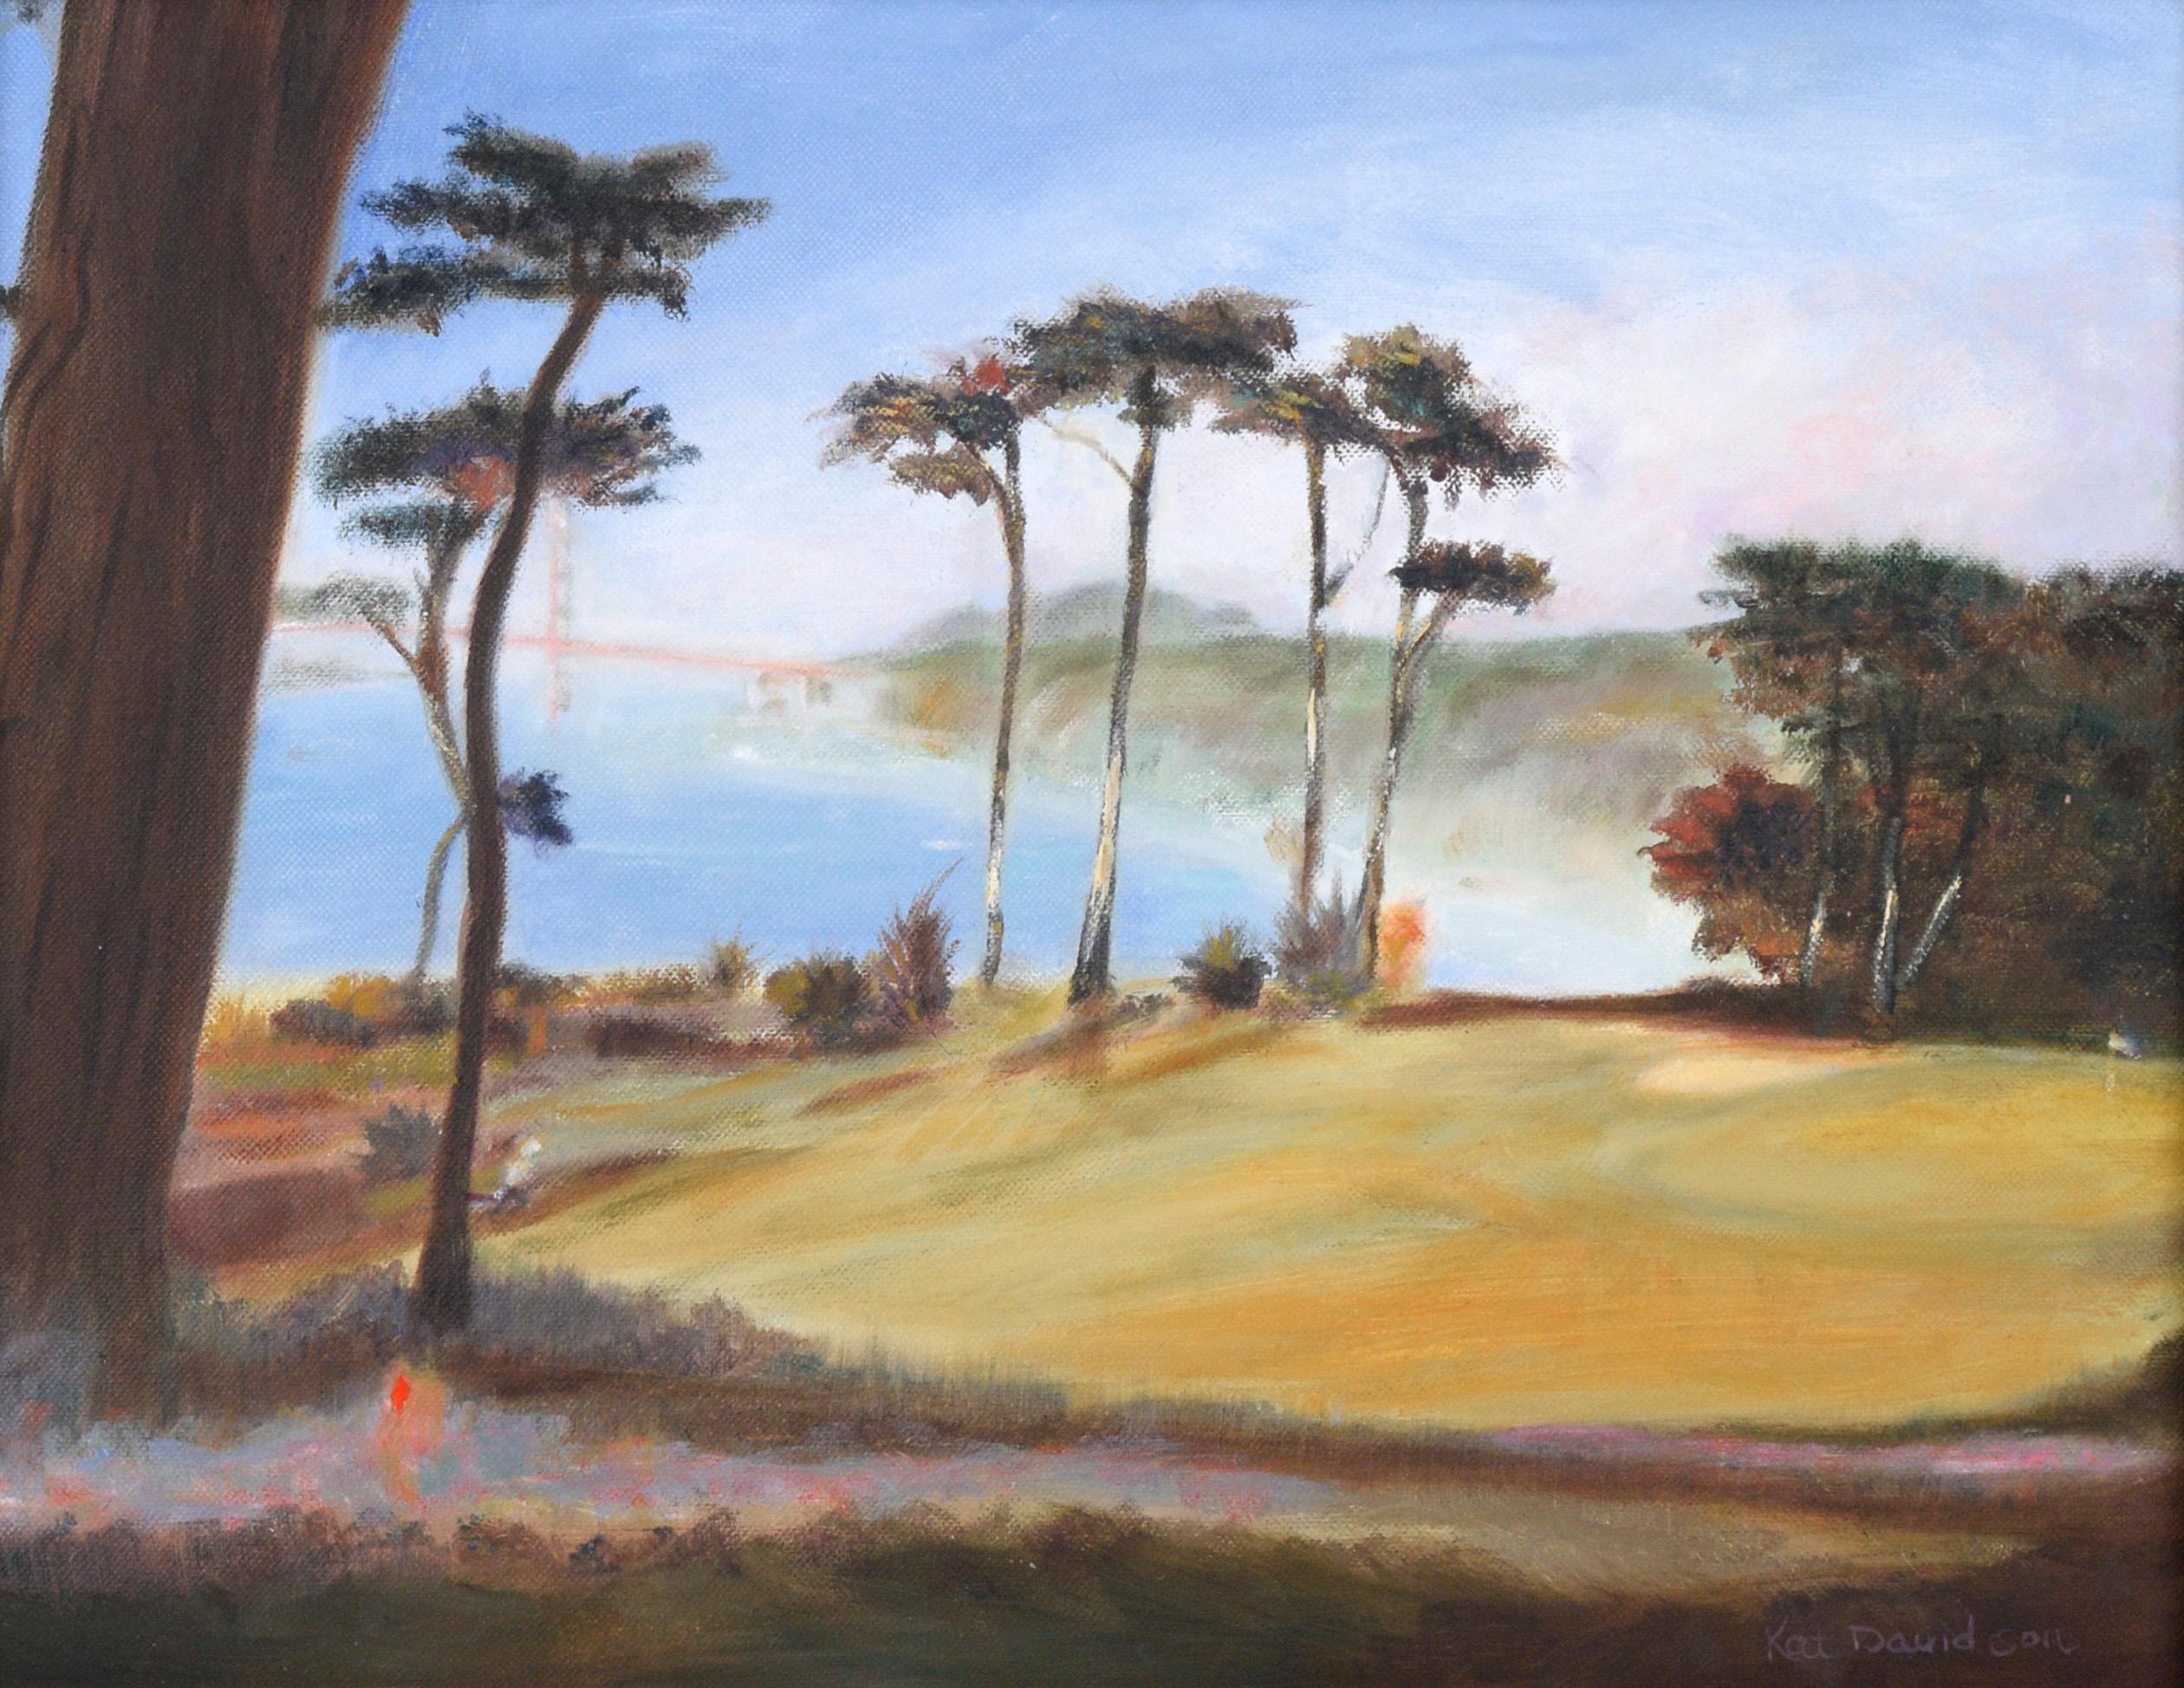 Golf Course by the Bay - Contemporary Plein Aire Landscape in Oil on Canvas - Painting by Kat Davidson